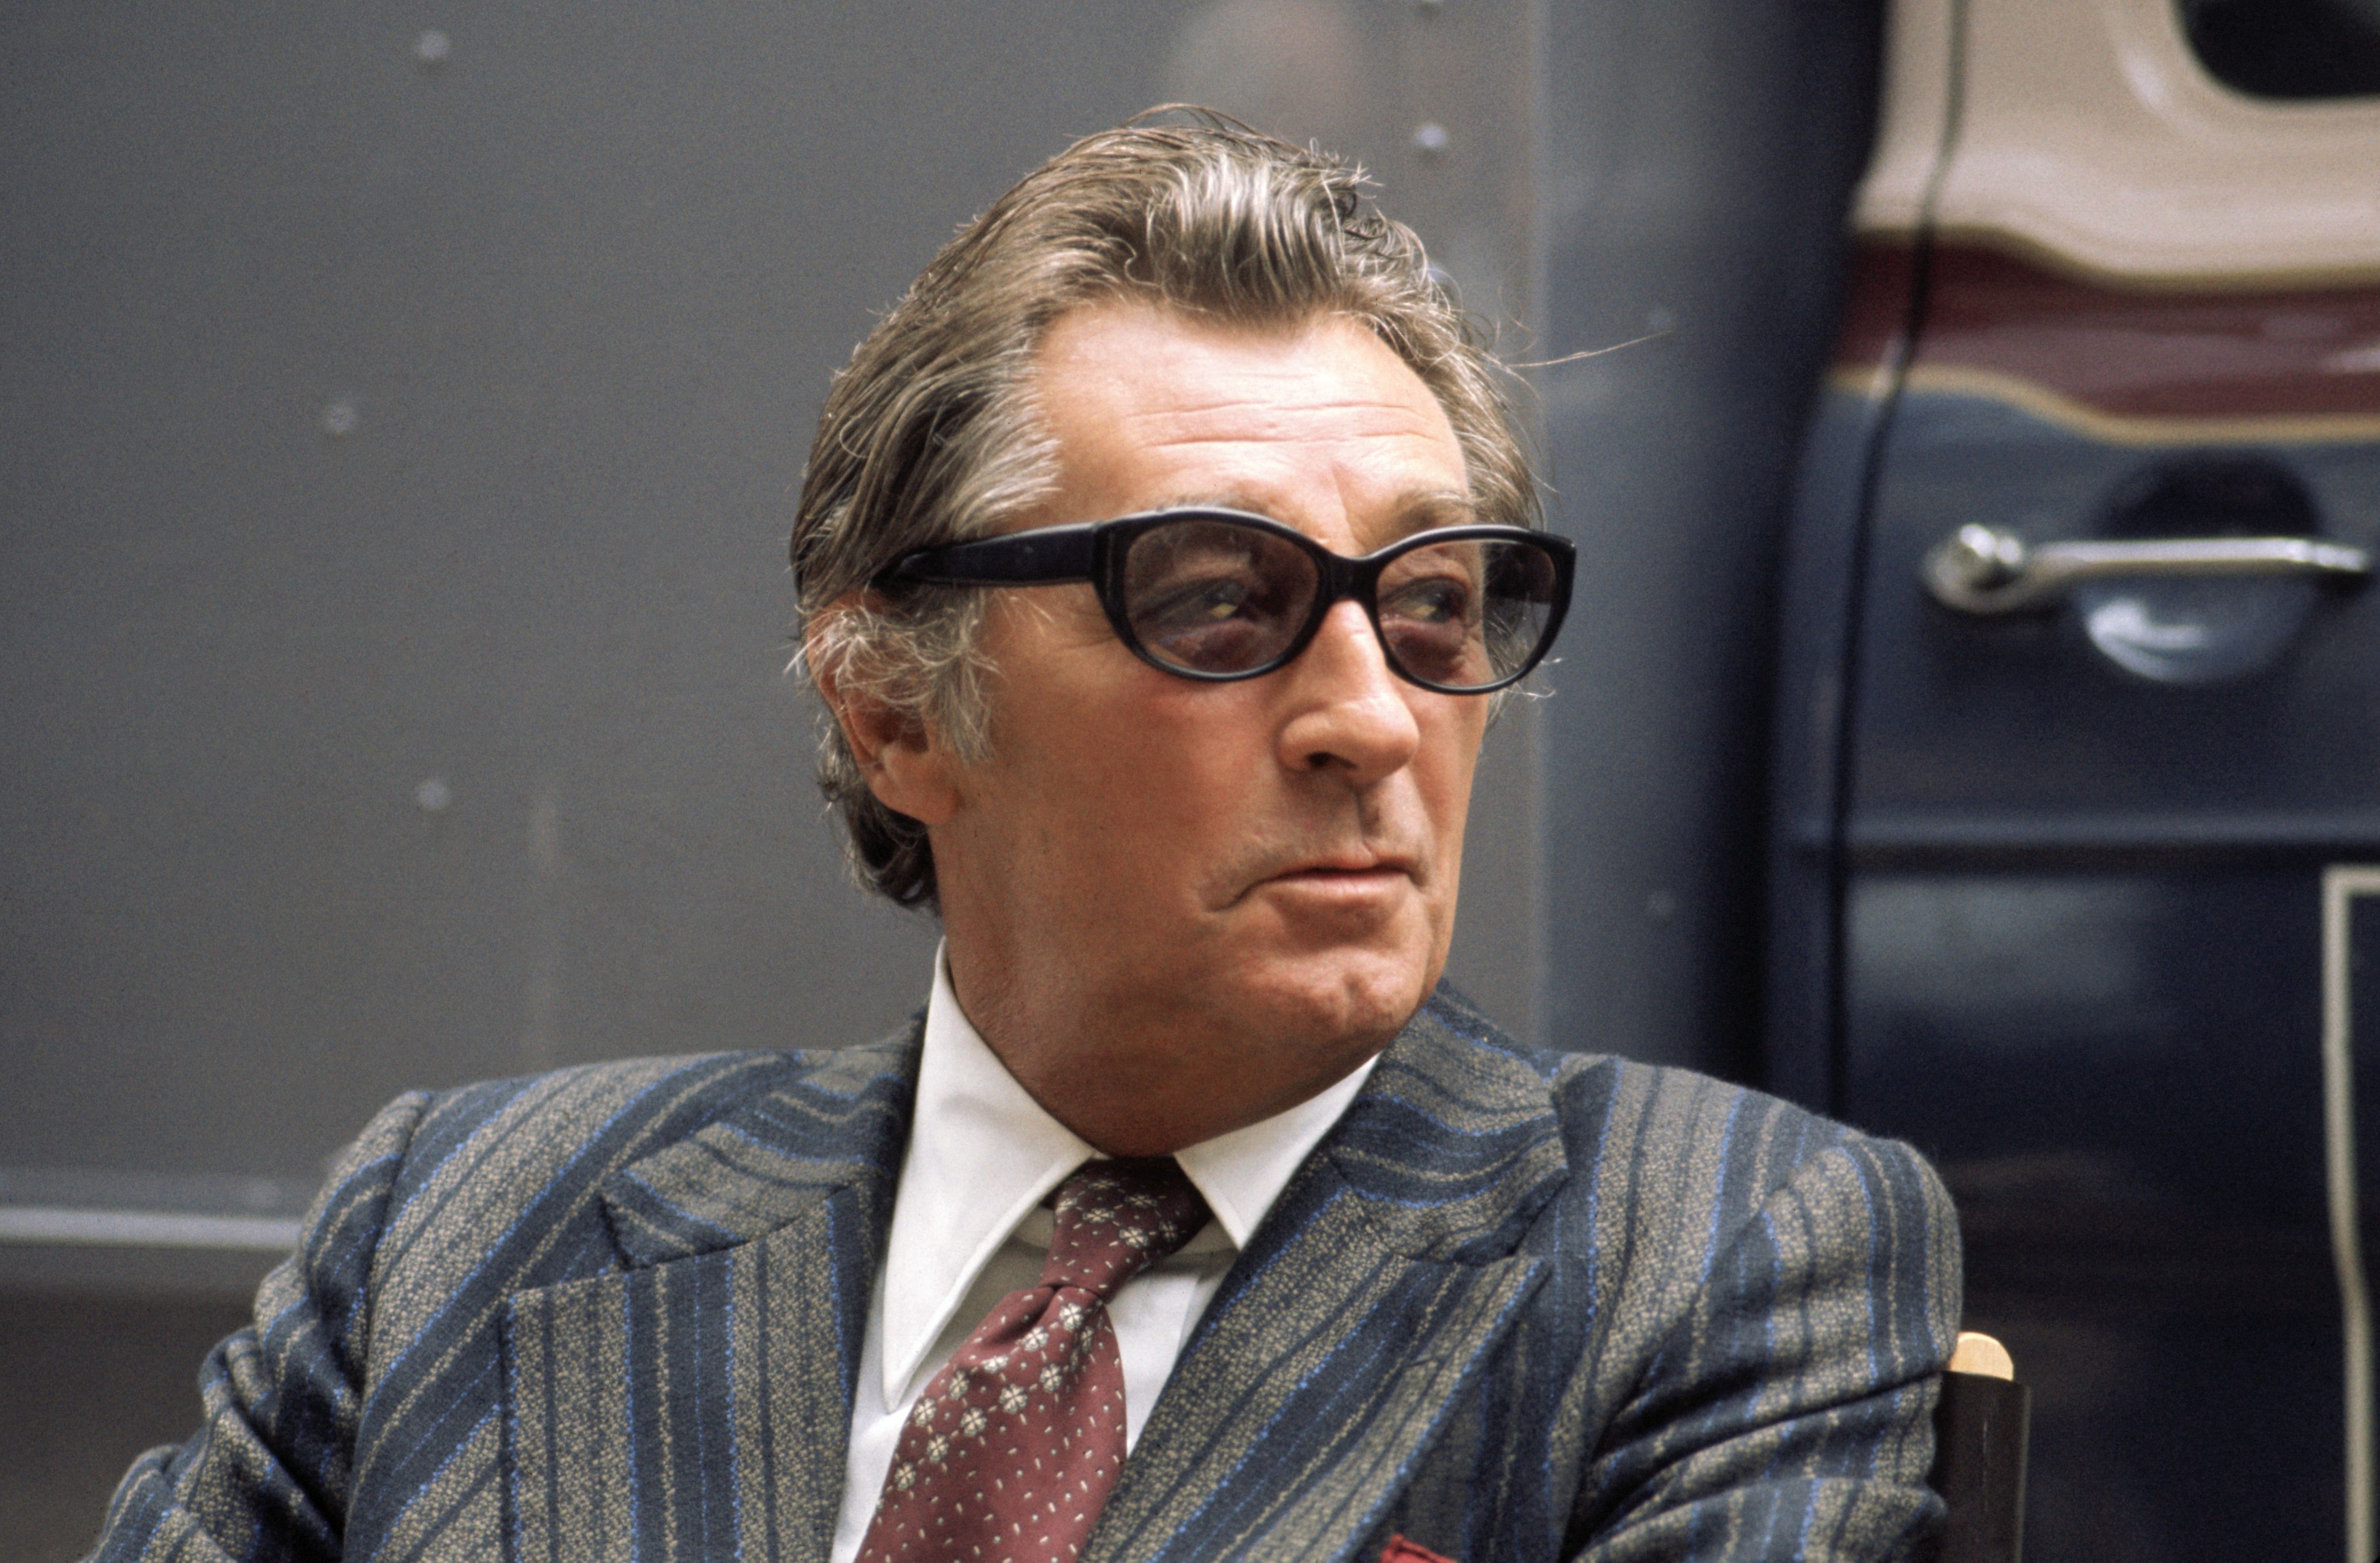 Robert Mitchum in London, England. Image uploaded on August 07, 1977 | Photo: Getty Images